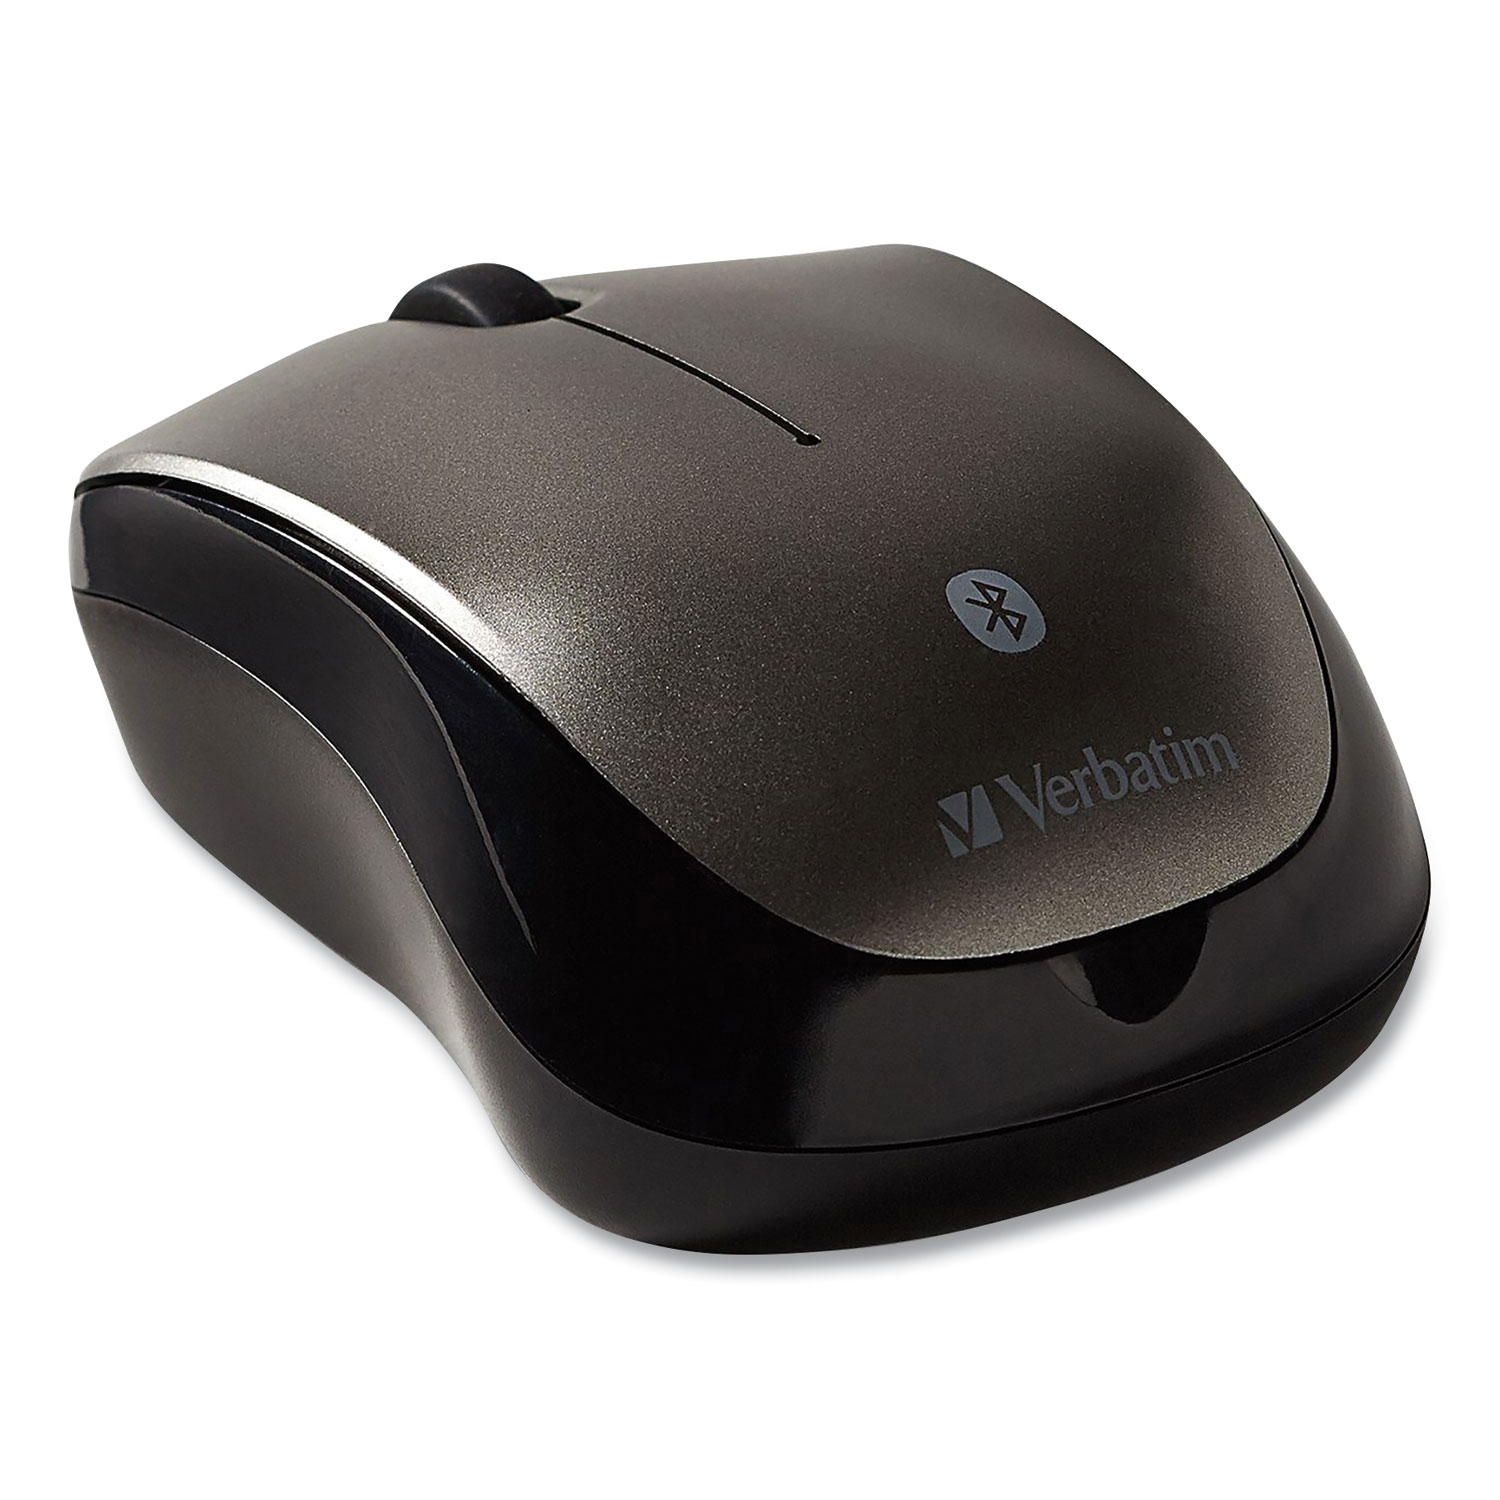  Verbatim 98590 Bluetooth Wireless Tablet Multi-Trac Blue LED Mouse, 2.4 GHz Frequency/30 ft Wireless Range, Left/Right Hand Use, Graphite (VER98590) 